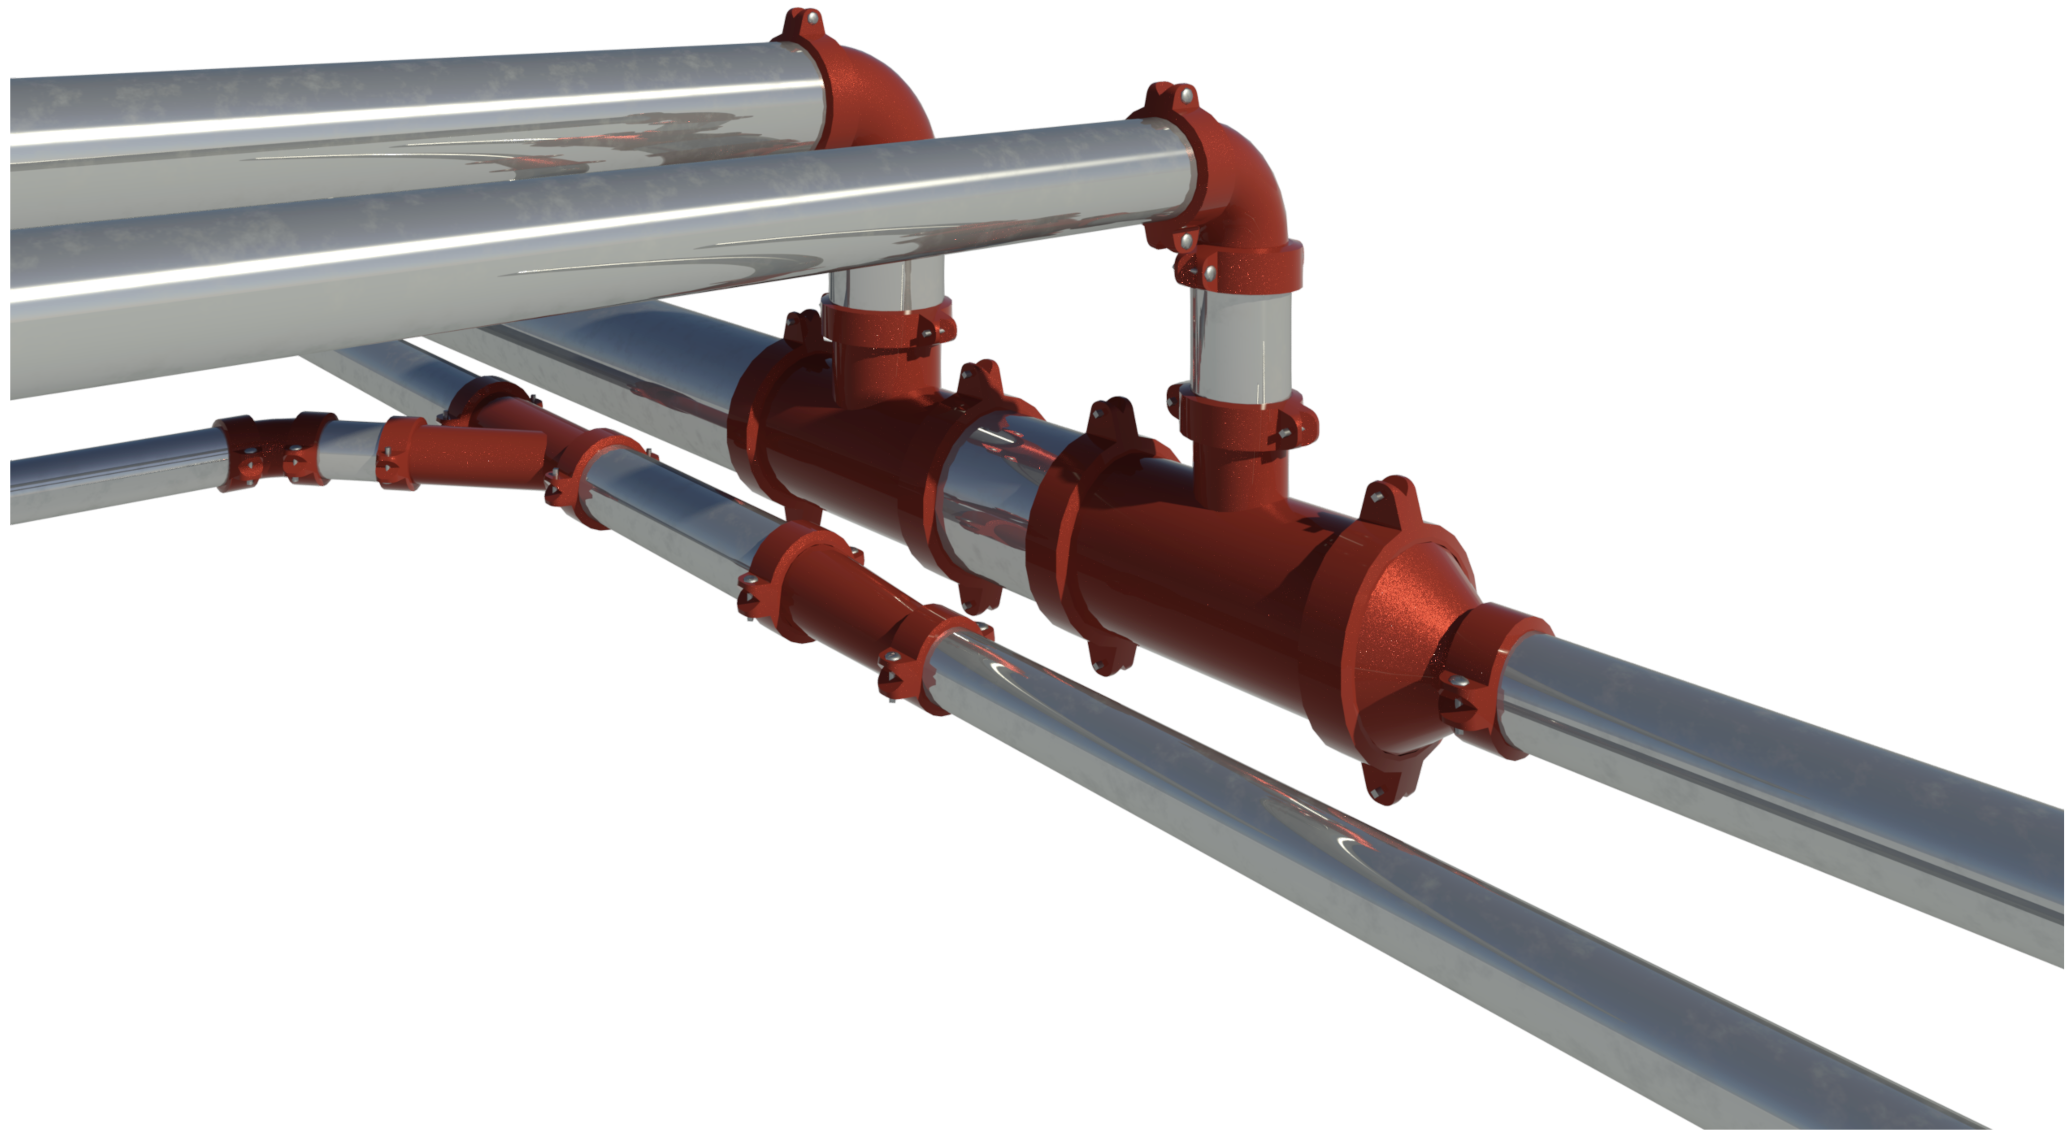 Revit raytrace of Grinnell grooved pipework collection.